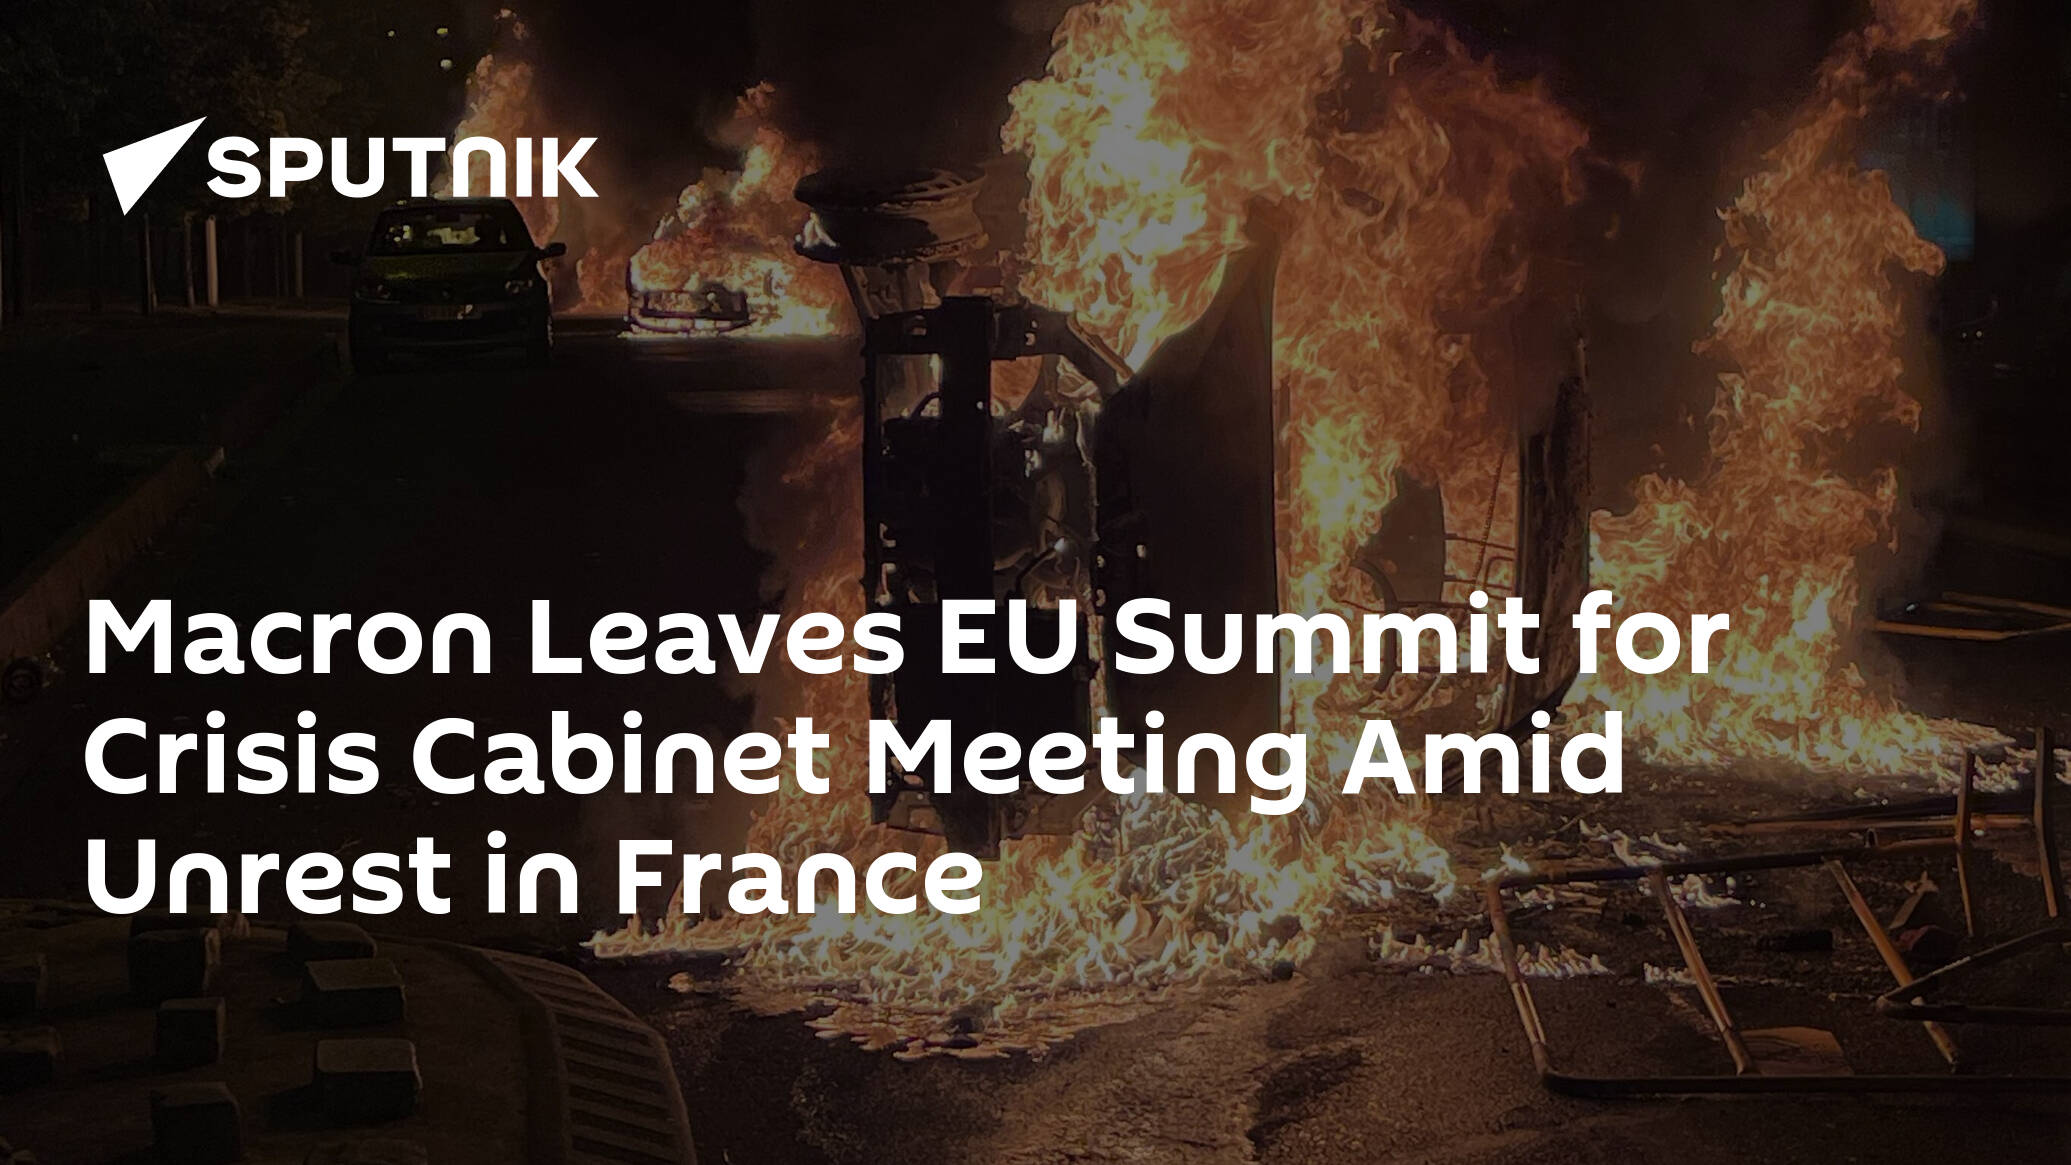 Macron Leaves EU Summit for Crisis Cabinet Meeting Amid Unrest in France